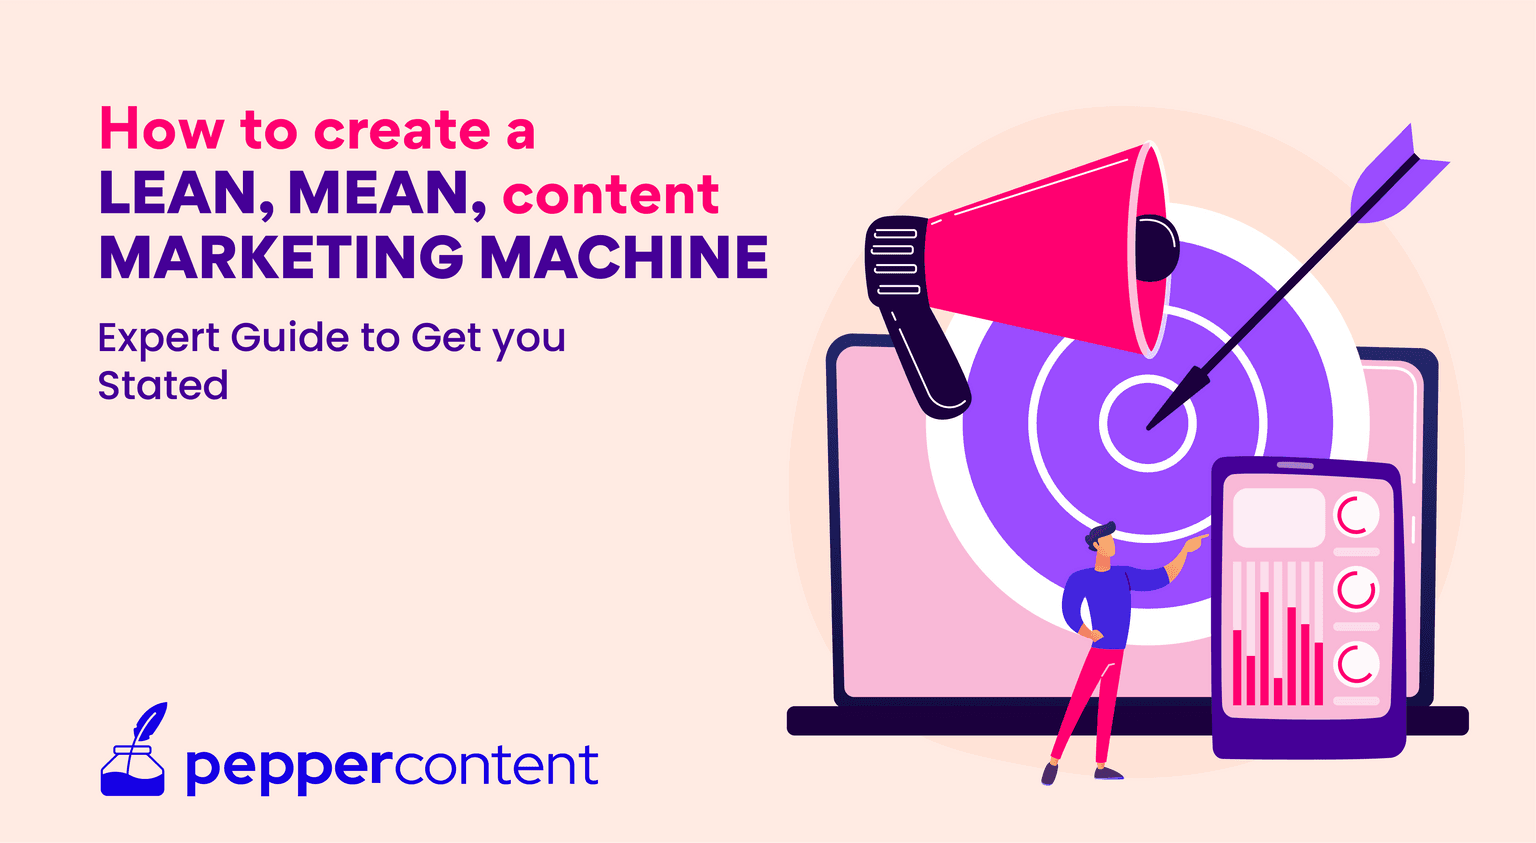 How to Create a Lean, Mean, Content Marketing Machine